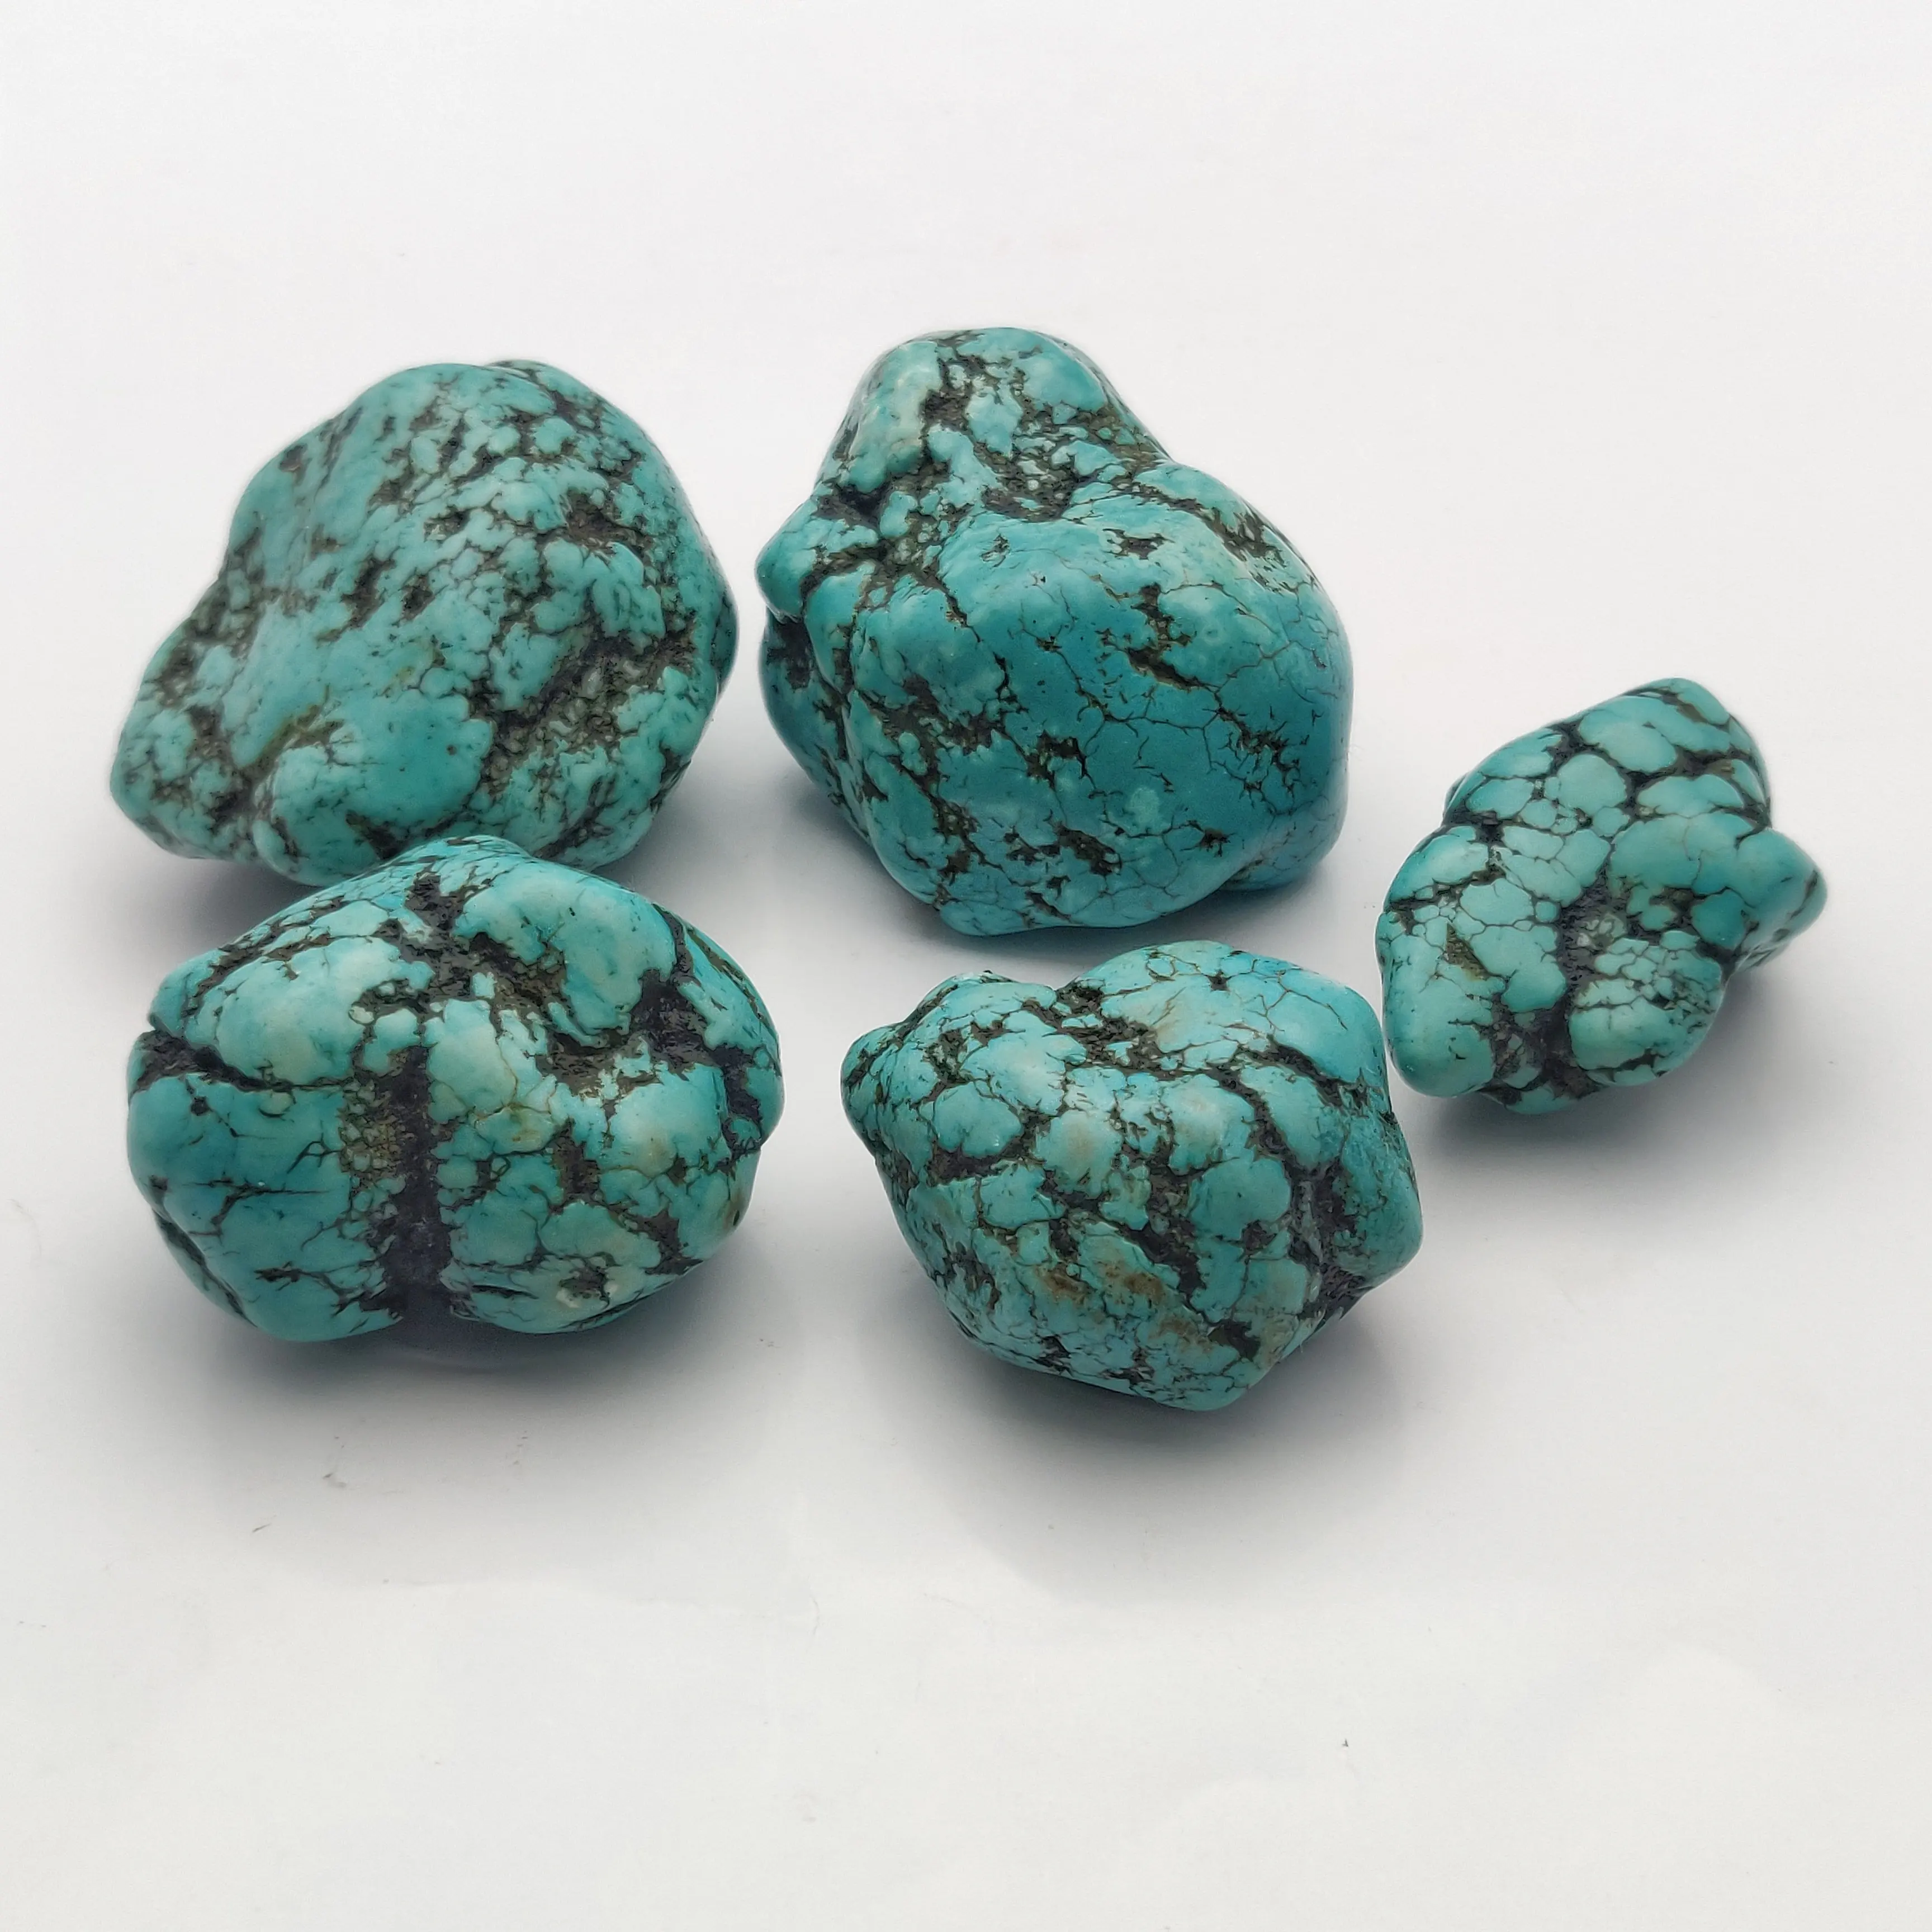 Highest Top Selling Good Rating Brilliant Quality Natural Turquoise Tumble Rough Great Color Fine Quality Rough